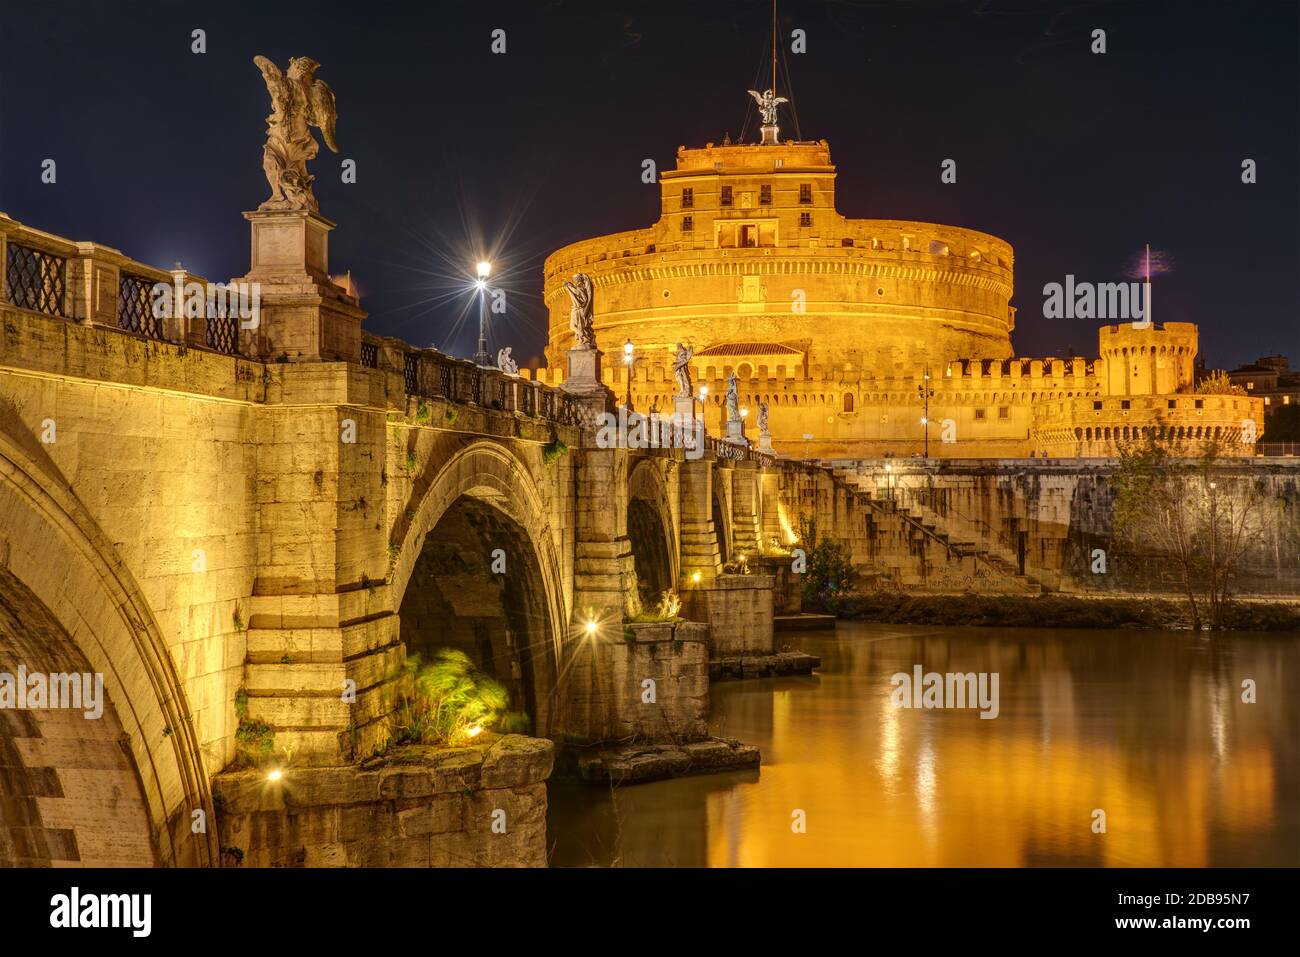 The famous Castel Sant Angelo and the Sant Angelo bridge in Rome, Italy, at night Stock Photo